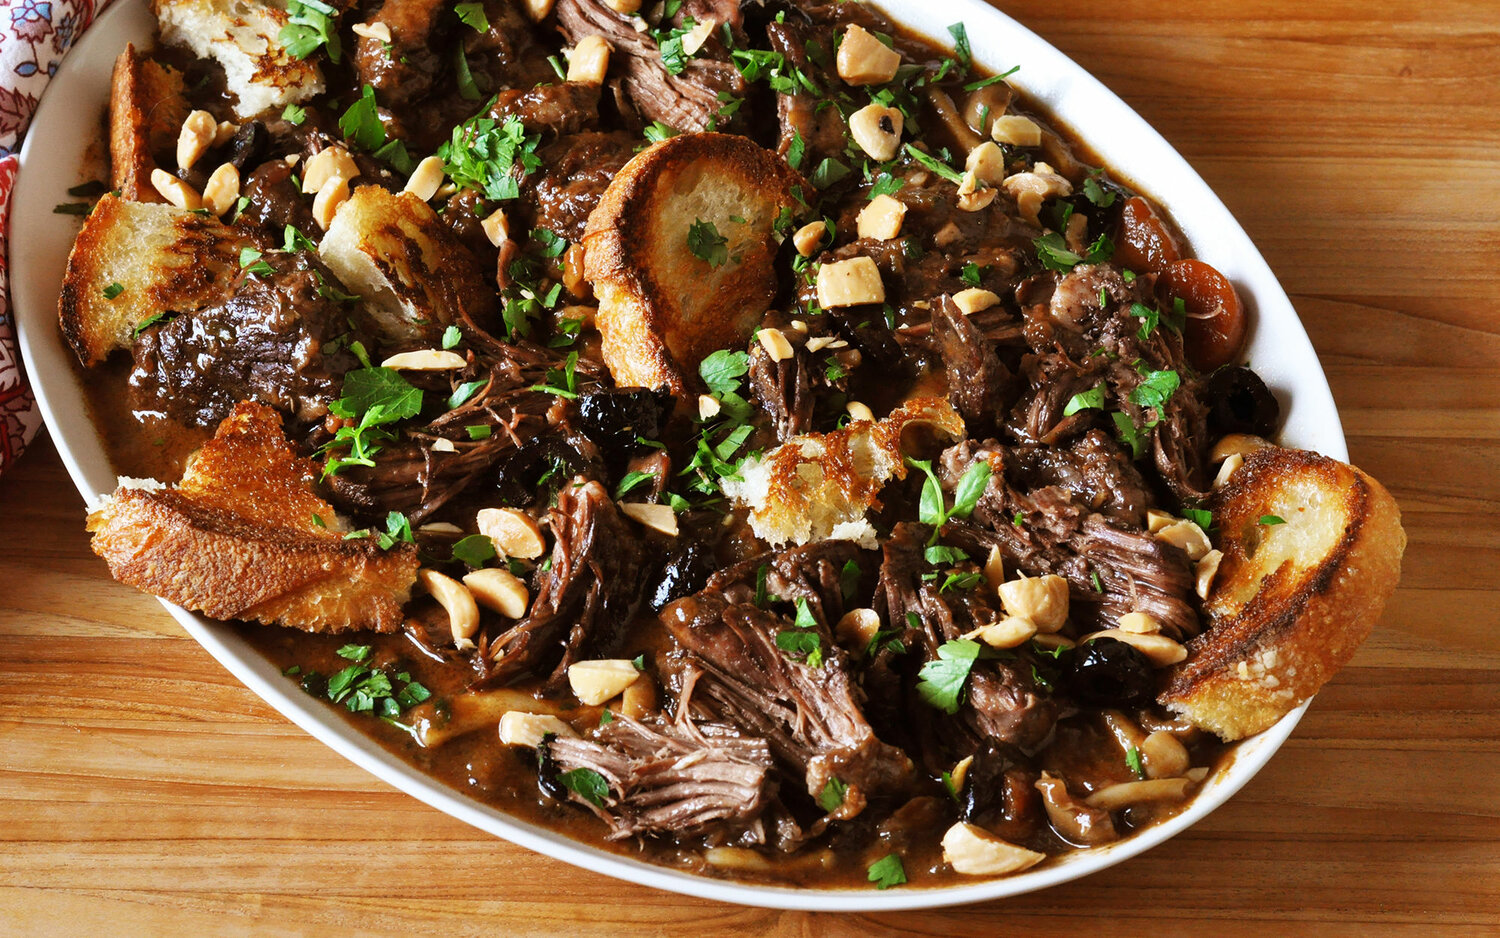 Catalan Short Ribs with Oyster Mushrooms, a dish that highlights the flavors of Oyster Mushrooms in a great holiday meal.